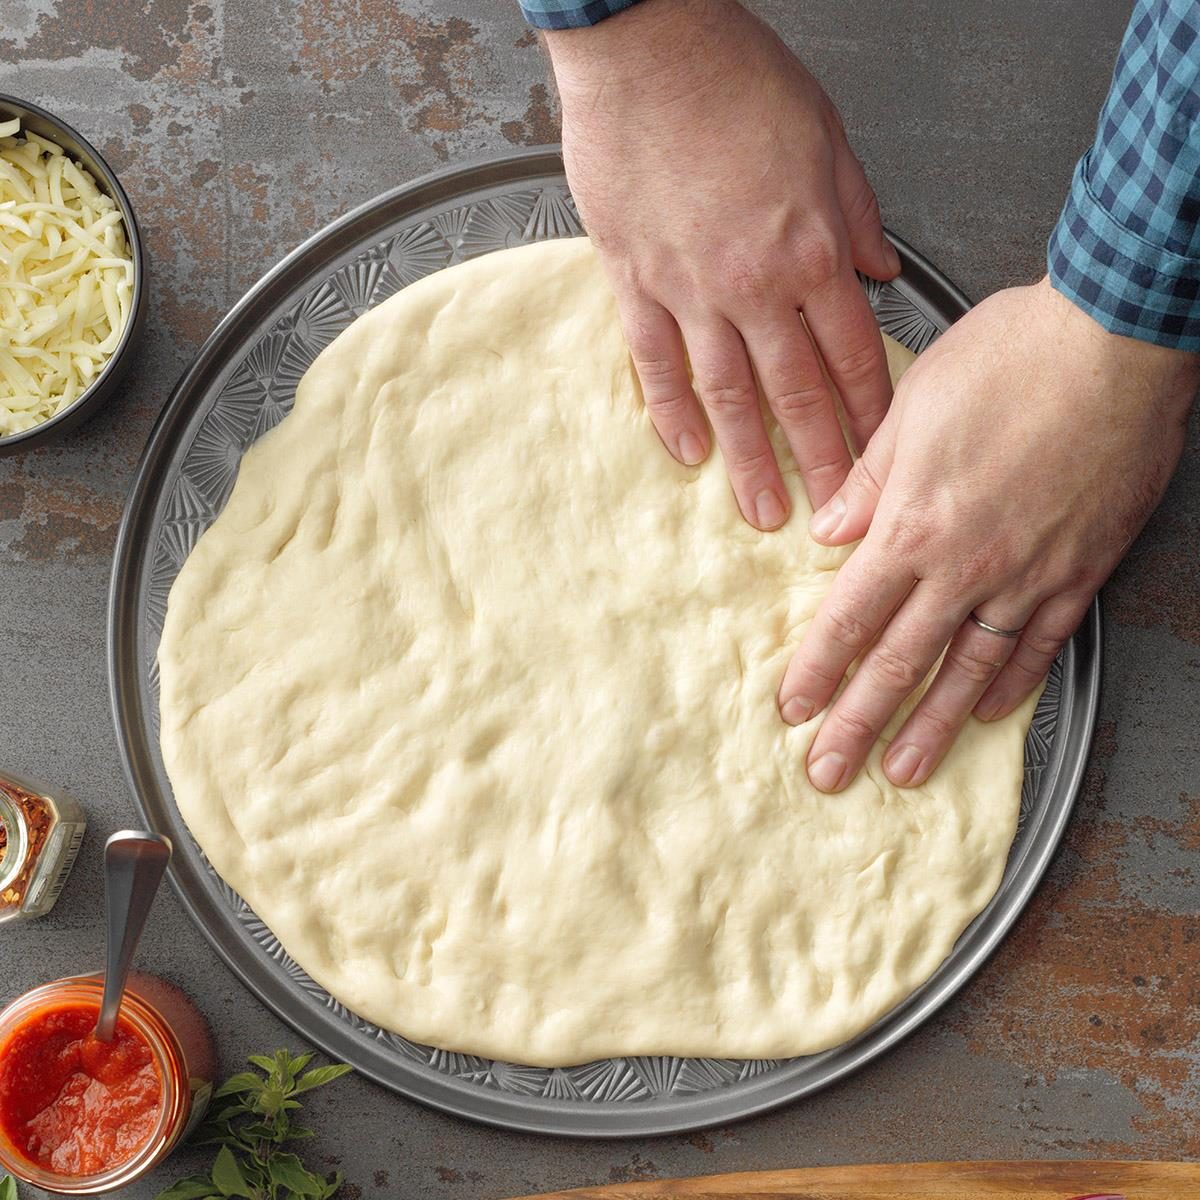 hands stretching pizza dough onto a baking pan